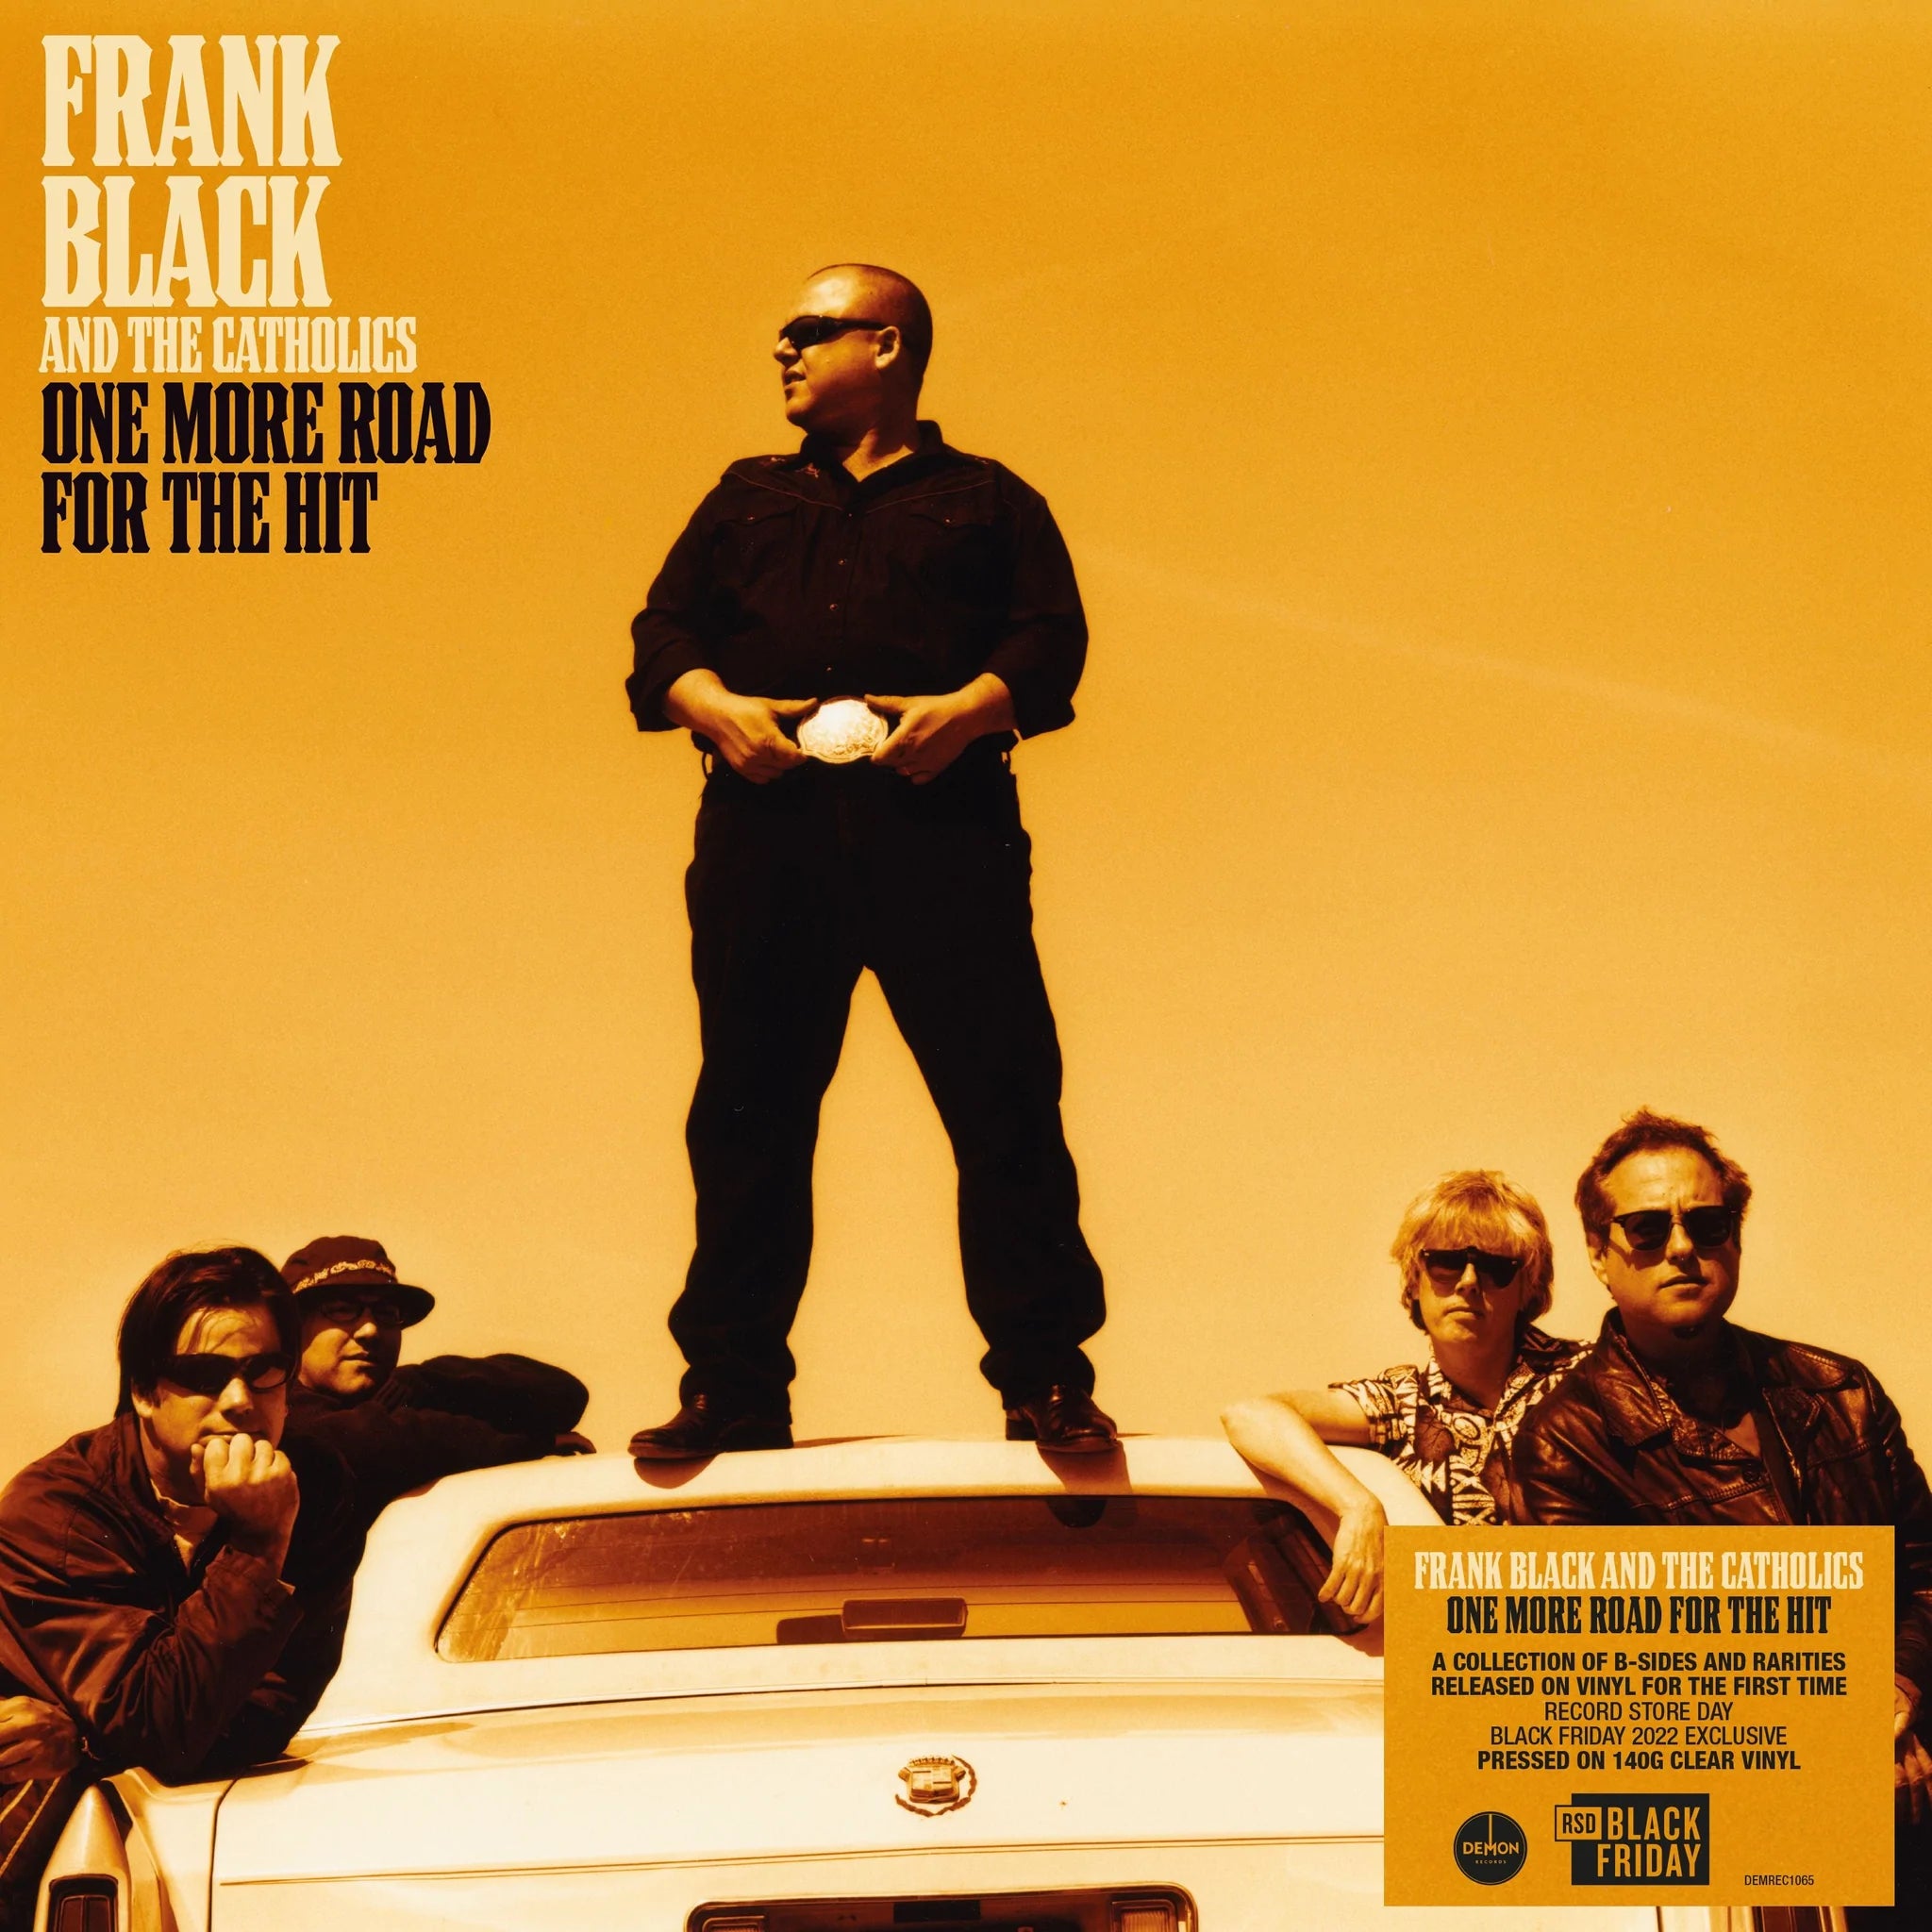 FRANK BLACK AND THE CATHOLICS - One More Road For The Hit [BLACK FRIDAY 2022] - LP - Clear Vinyl